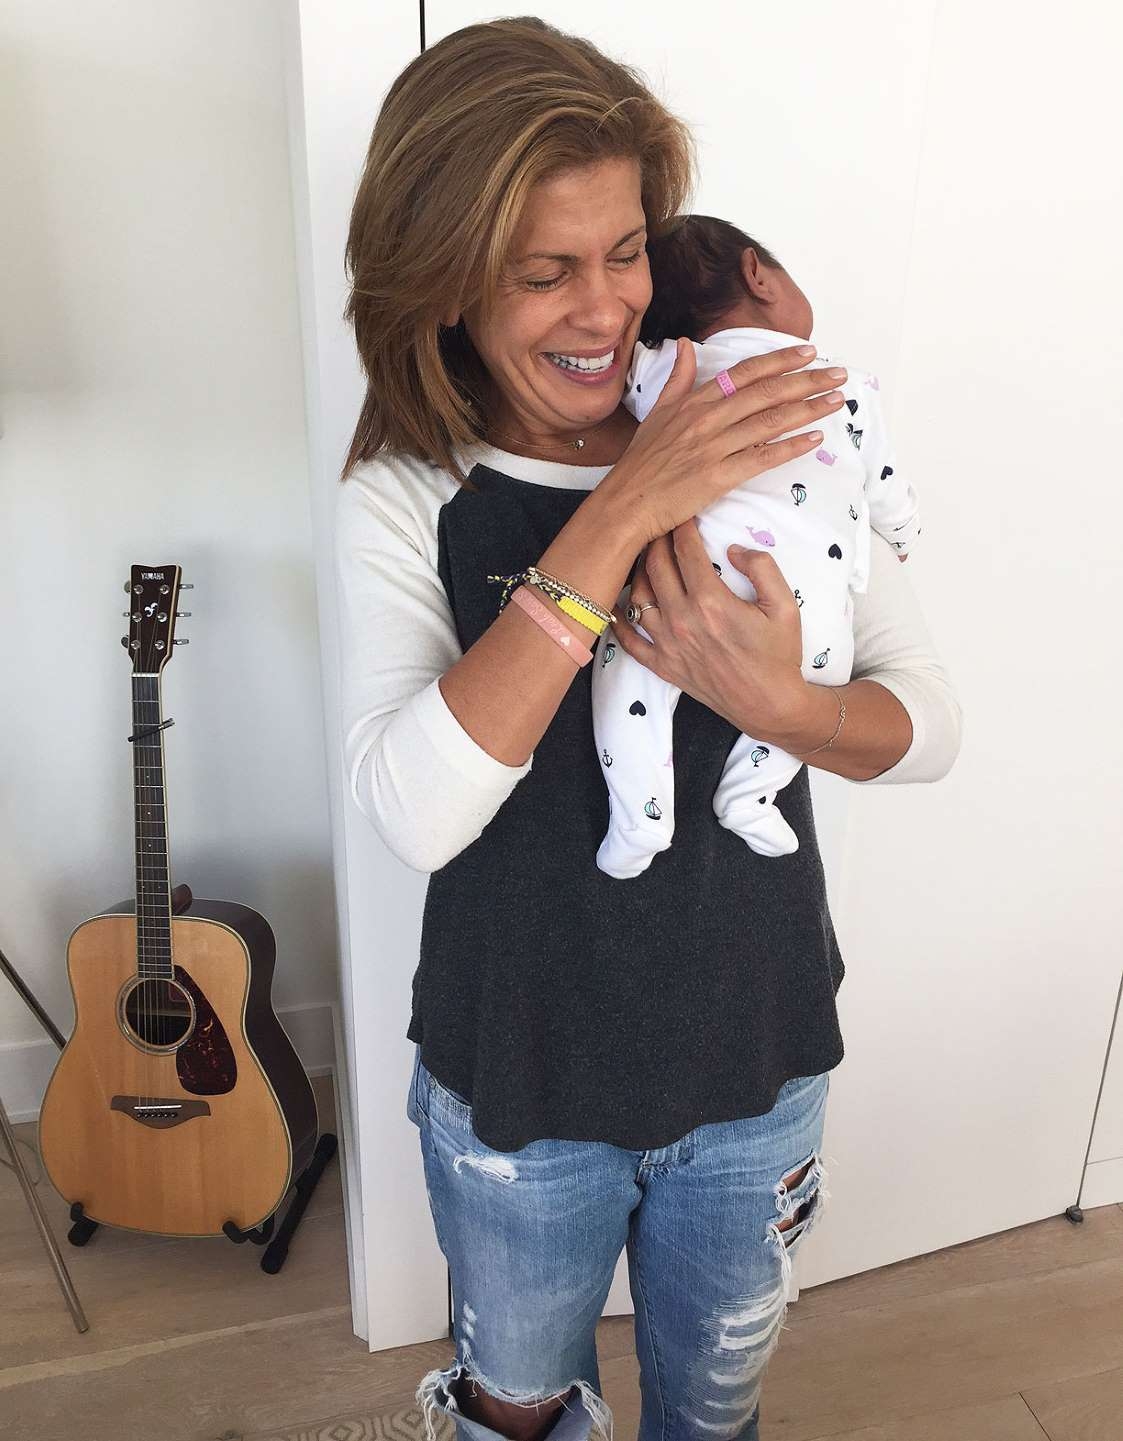 Hoda Kotb Opens Up About Emotional Adoption at 52 After Cancer Left Her Unable to Conceive